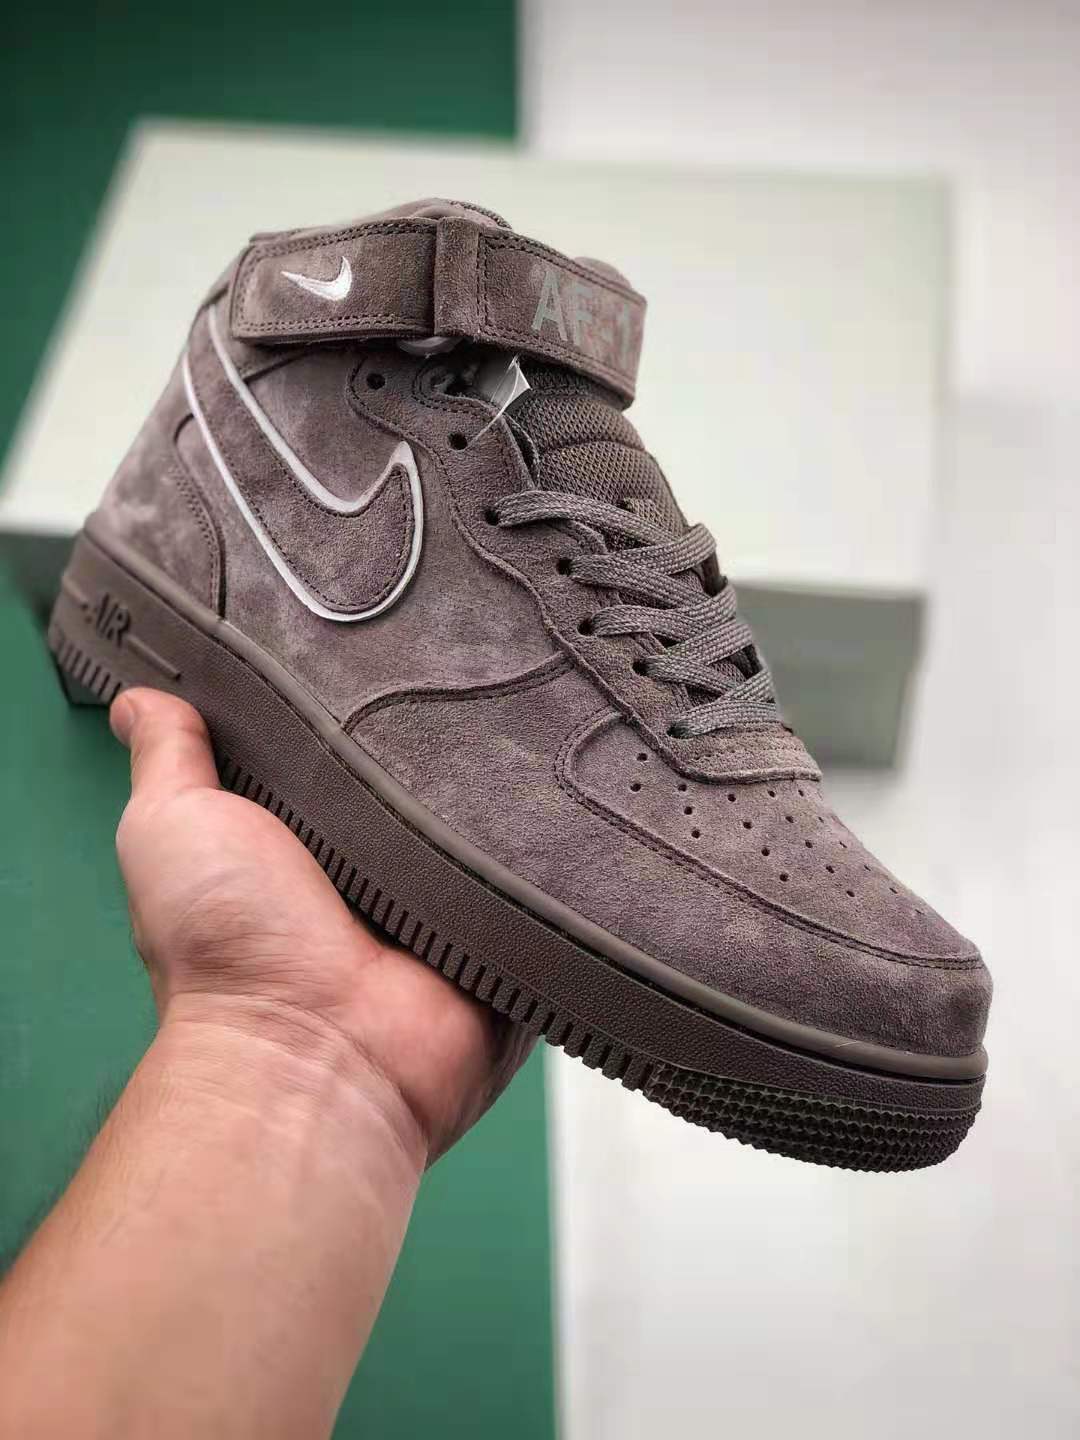 Nike Air Force 1 High '07 LV8 Suede Atmosphere Grey AA1118-003 - Stylish and Comfortable Men's Sneakers